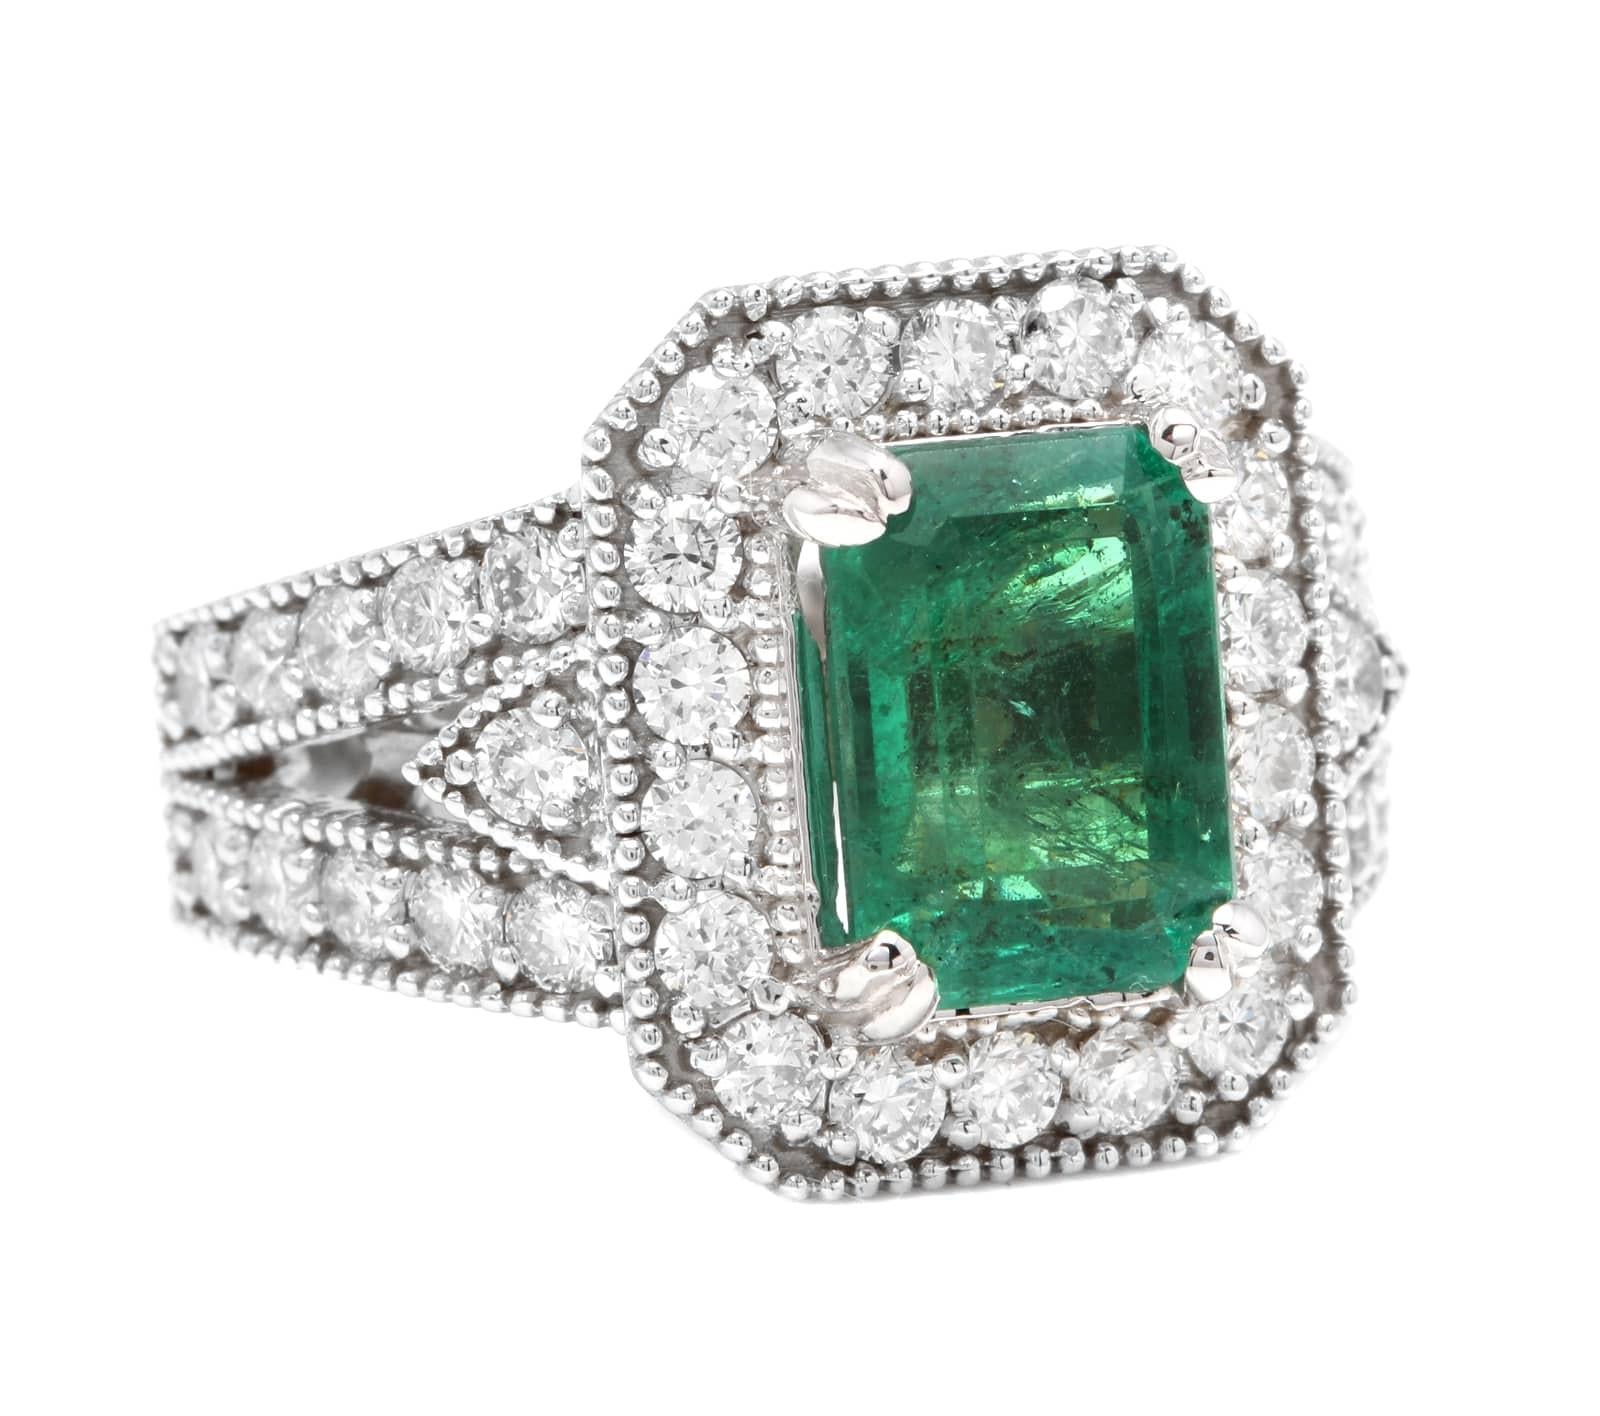 3.80 Carats Natural Emerald and Diamond 14K Solid White Gold Ring

Total Natural Green Emerald Weight is: Approx. 2.50 Carats (transparent)

Emerald Measures: Approx. 9.60 x 7.00mm

Emerald Treatment: Oiling Natural

Round Diamonds Weight: Approx.